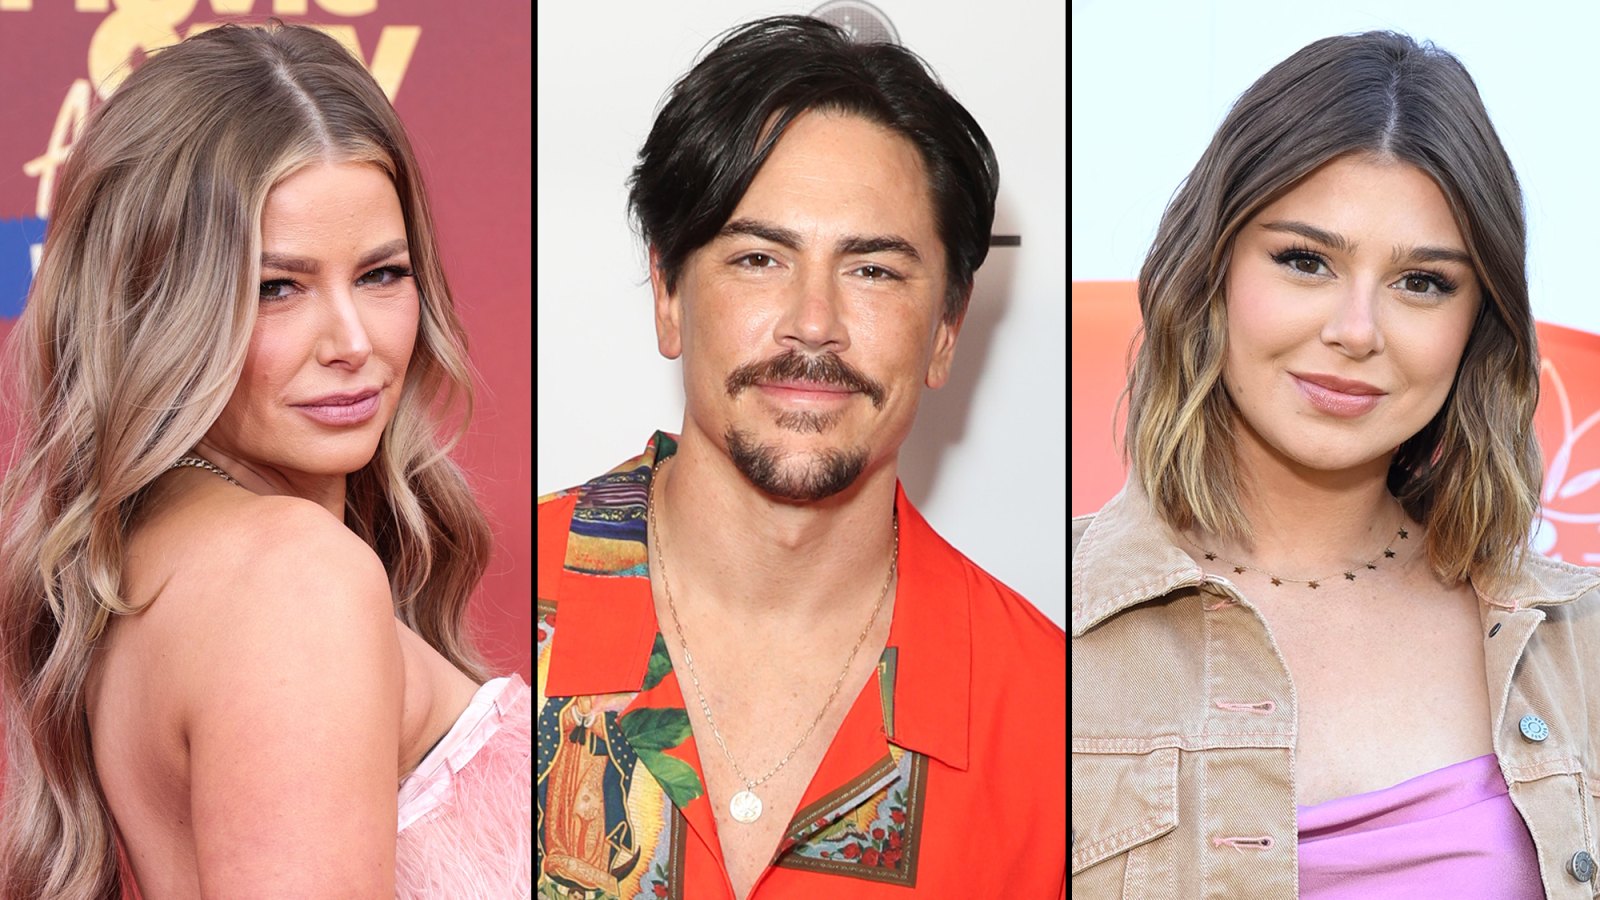 Ariana Madix Faces Off Against Tom Sandoval and Raquel Leviss Amid Cheating Scandal in 1st 'Pump Rules' Reunion Photos: Details